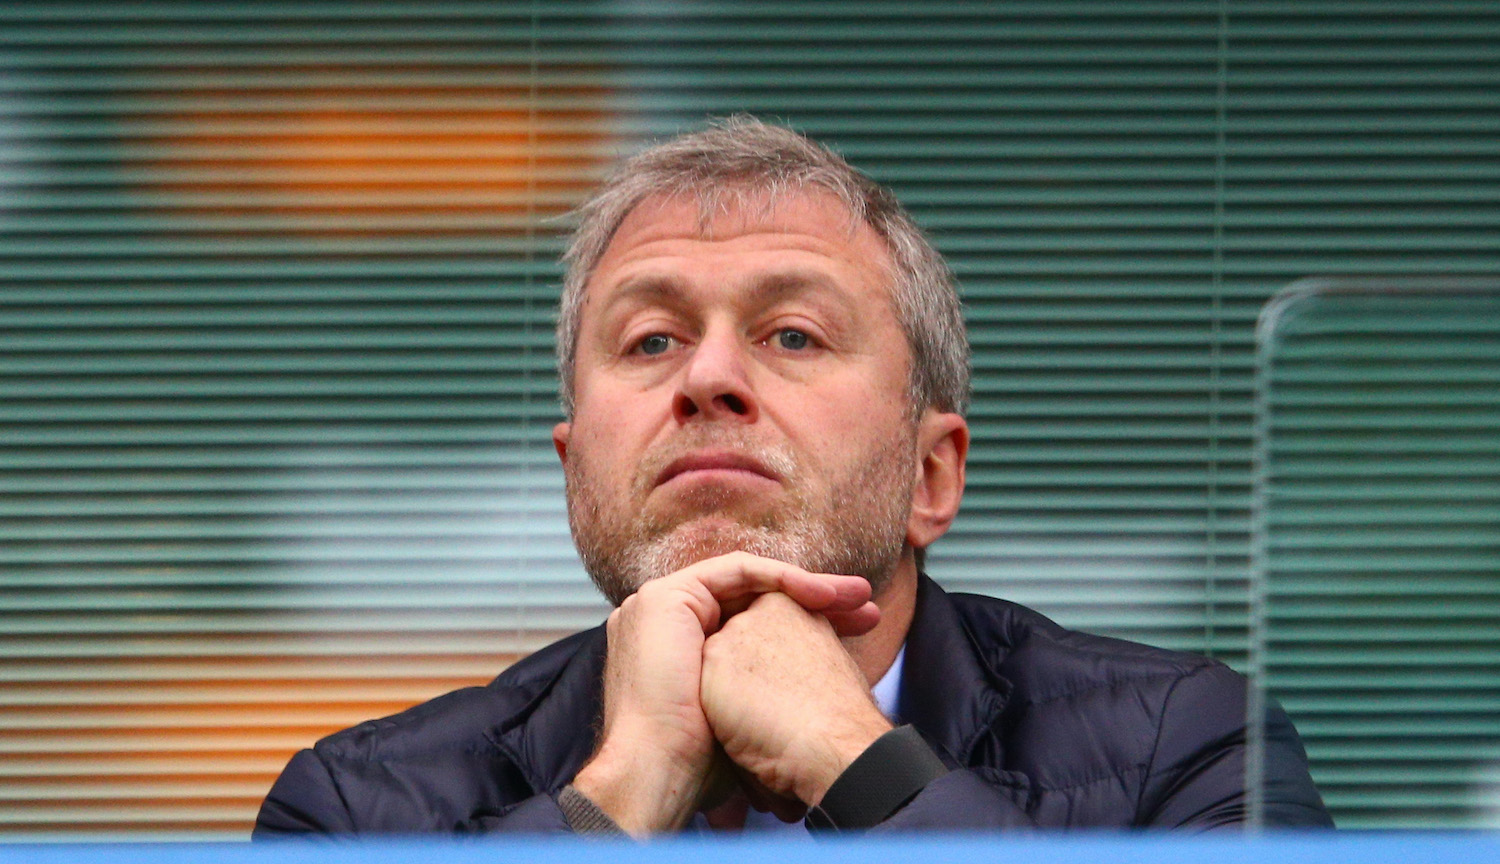 Abramovich watches during the Barclays Premier League match between Chelsea and Sunderland at Stamford Bridge on December 19, 2015 in London, England.